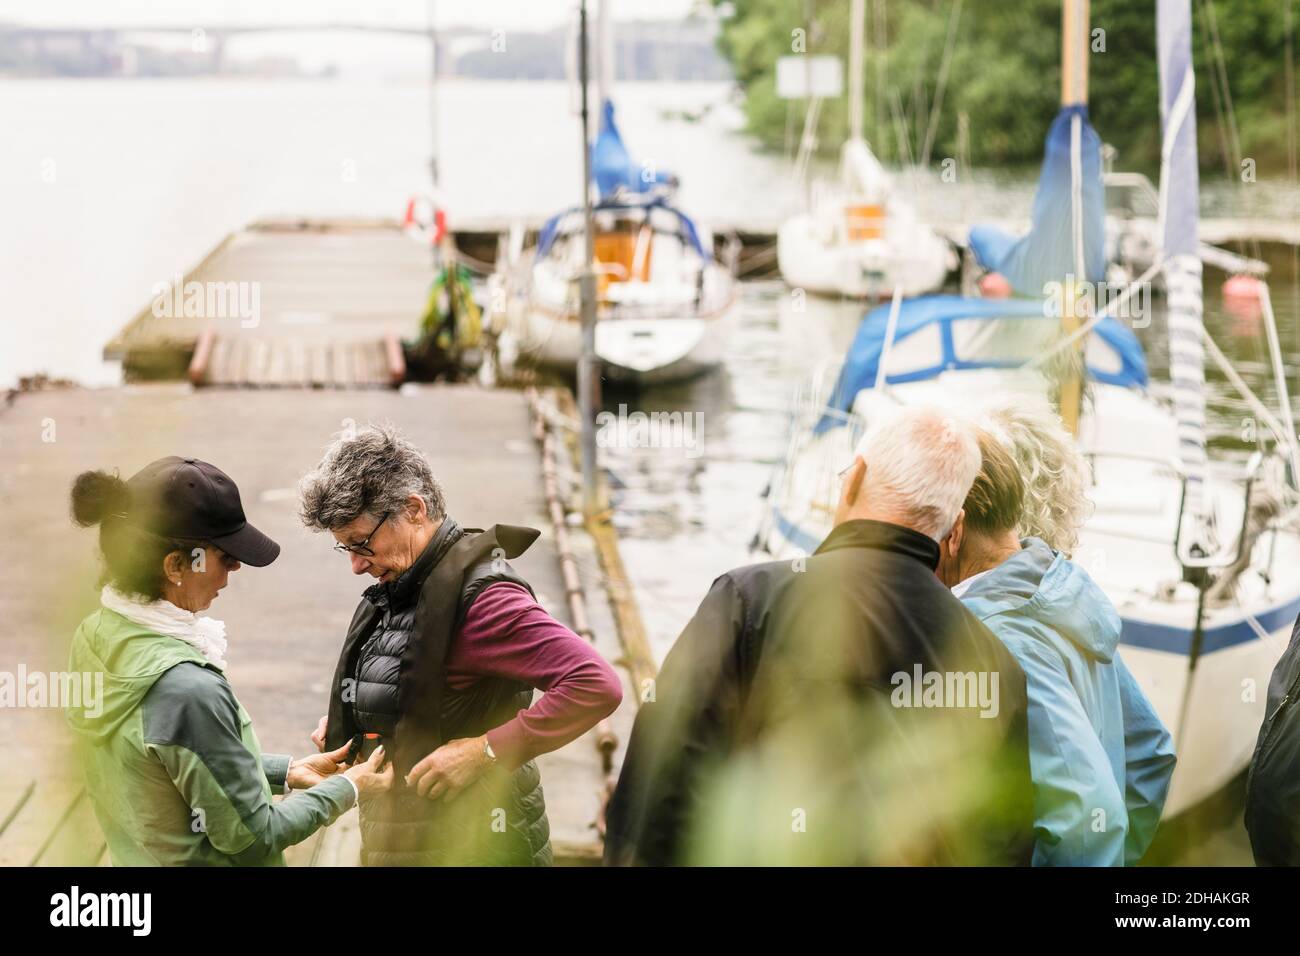 Female instructor helping senior men and woman about life jacket during boat master course Stock Photo